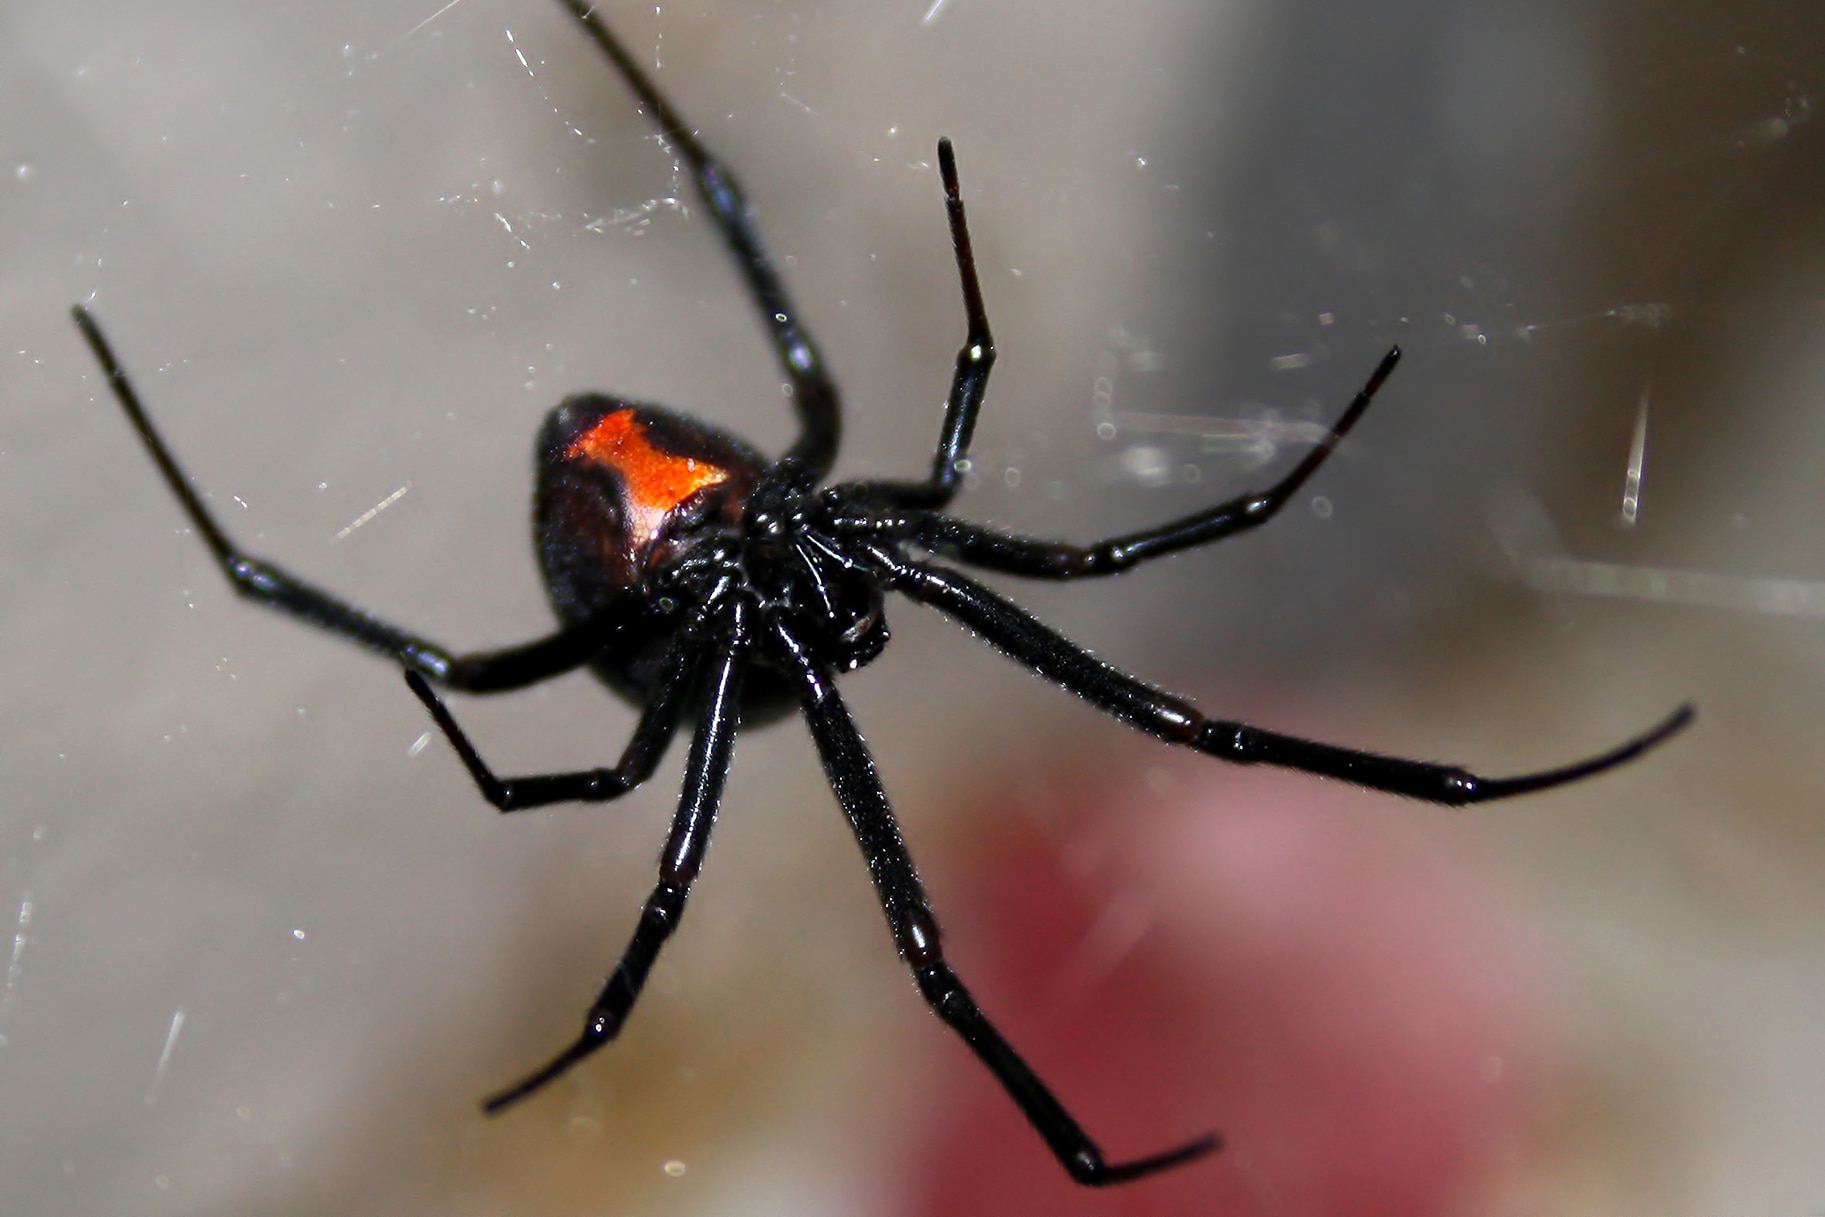 A close up image of a Black Widow Spider